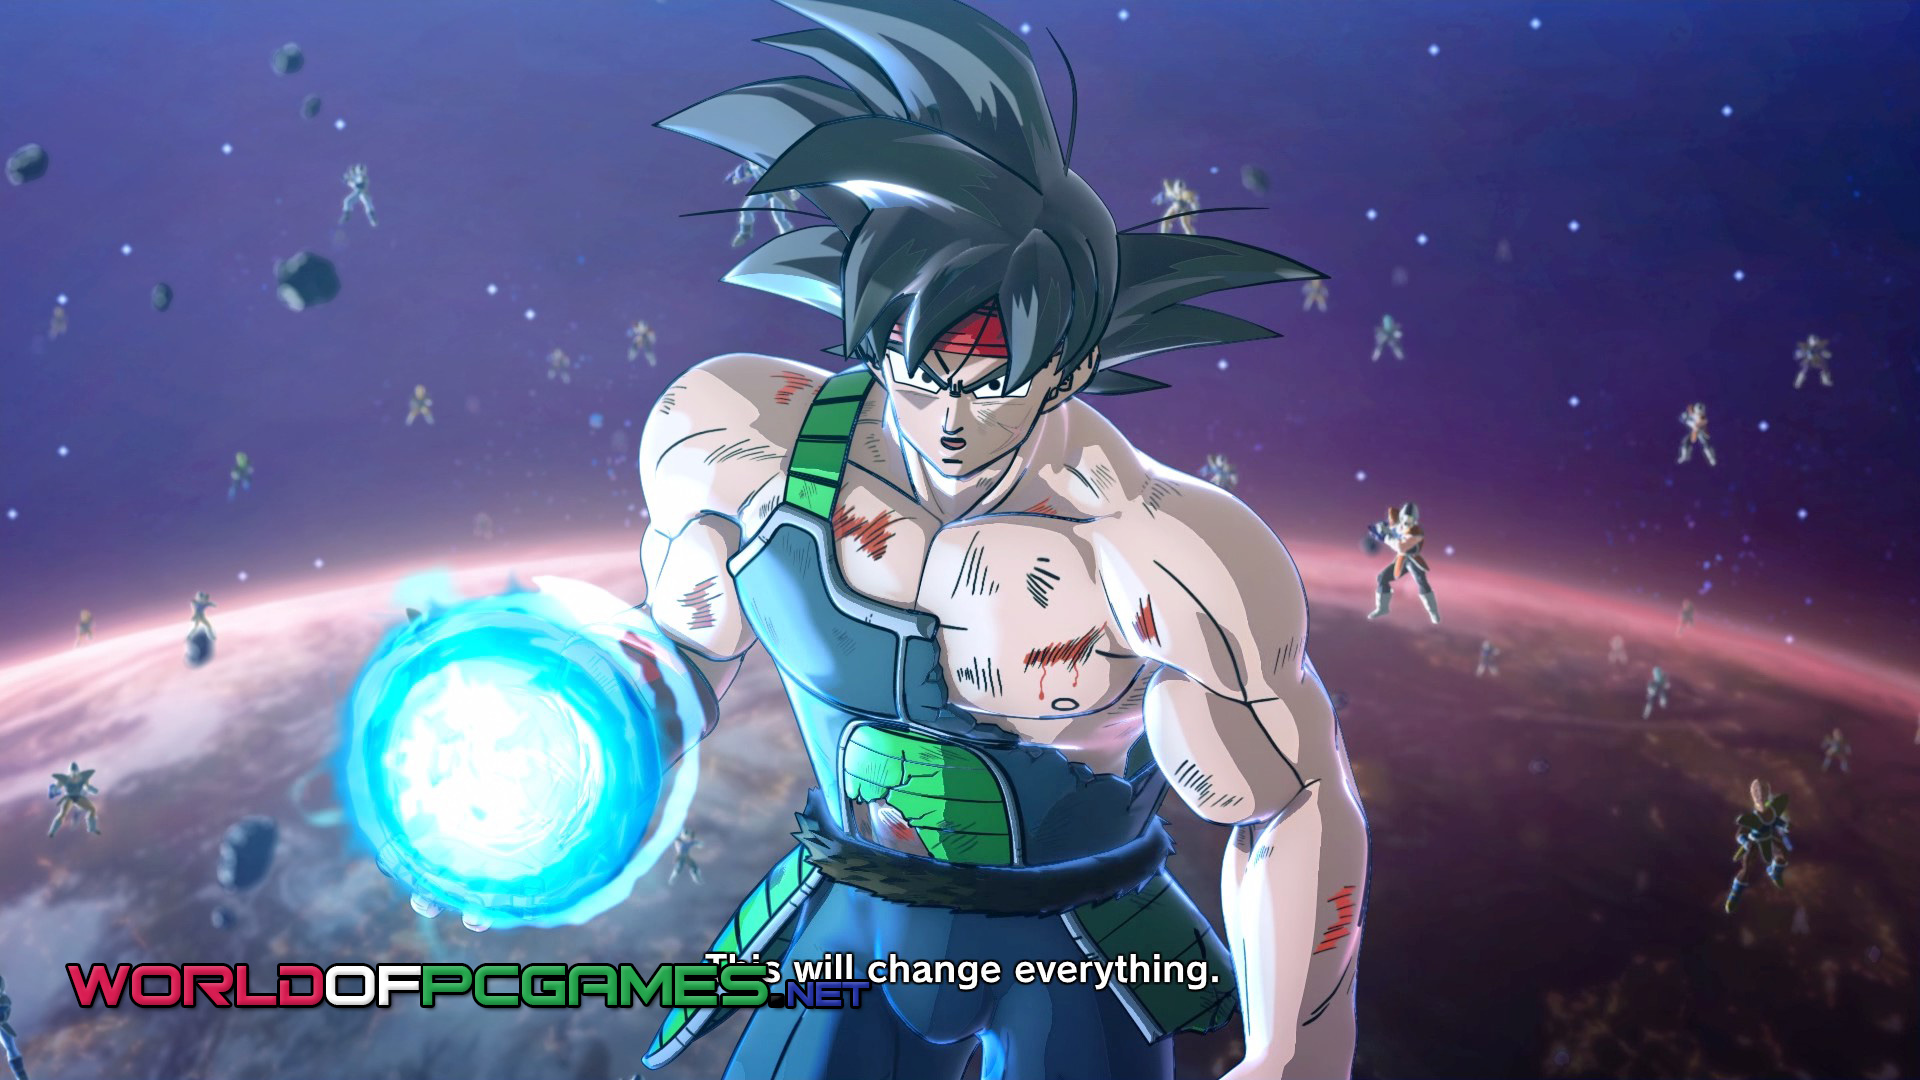 dragon ball games for pc download free